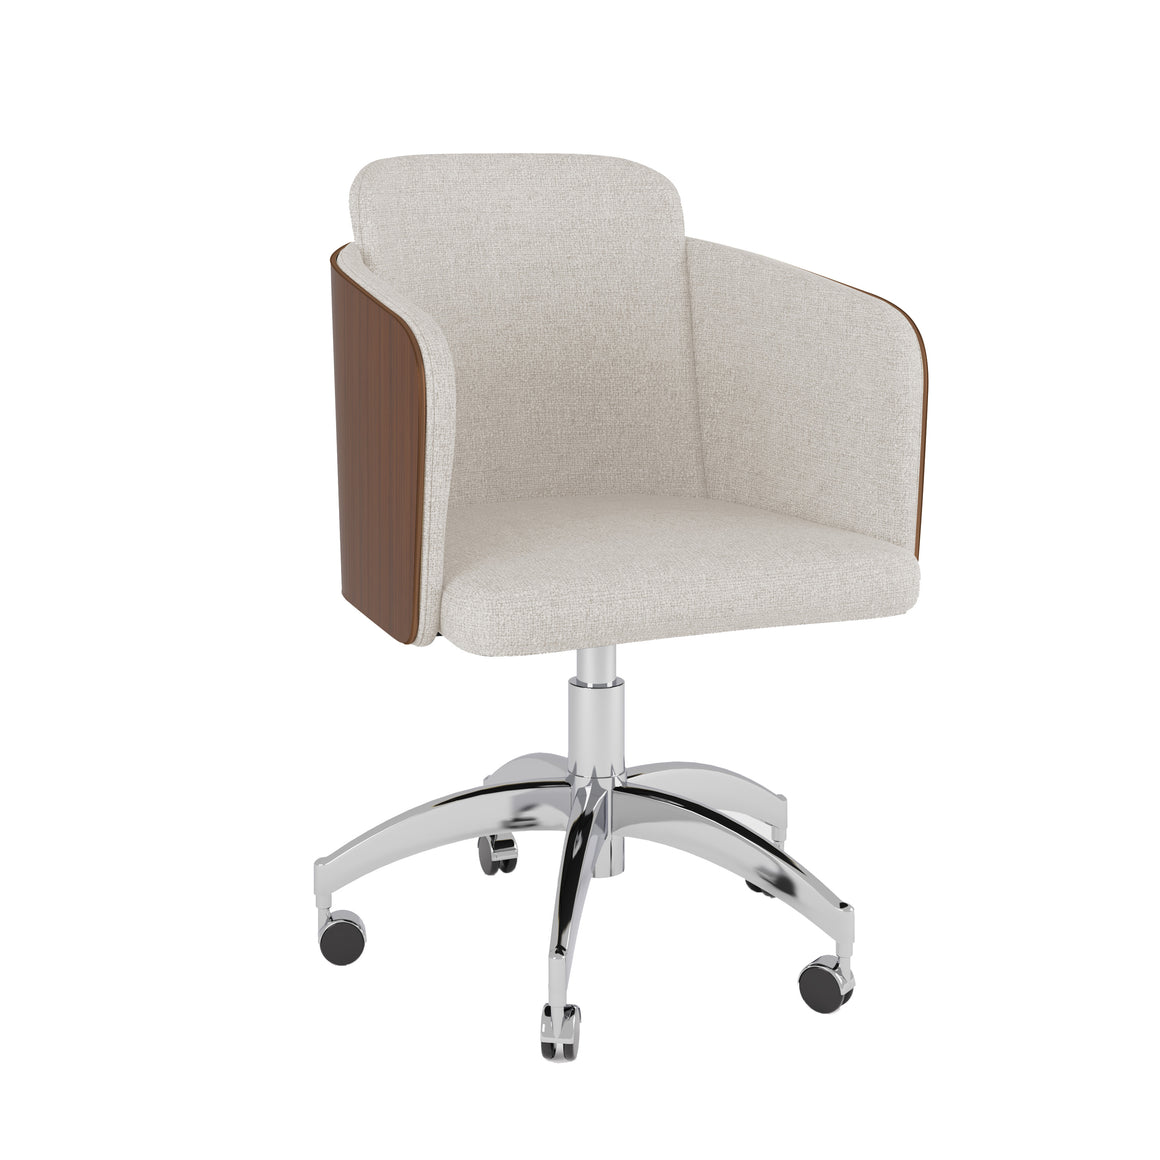 PC812 Fabric Office Chair Walnut - PRE ORDER FOR DELIVERY IN MAY